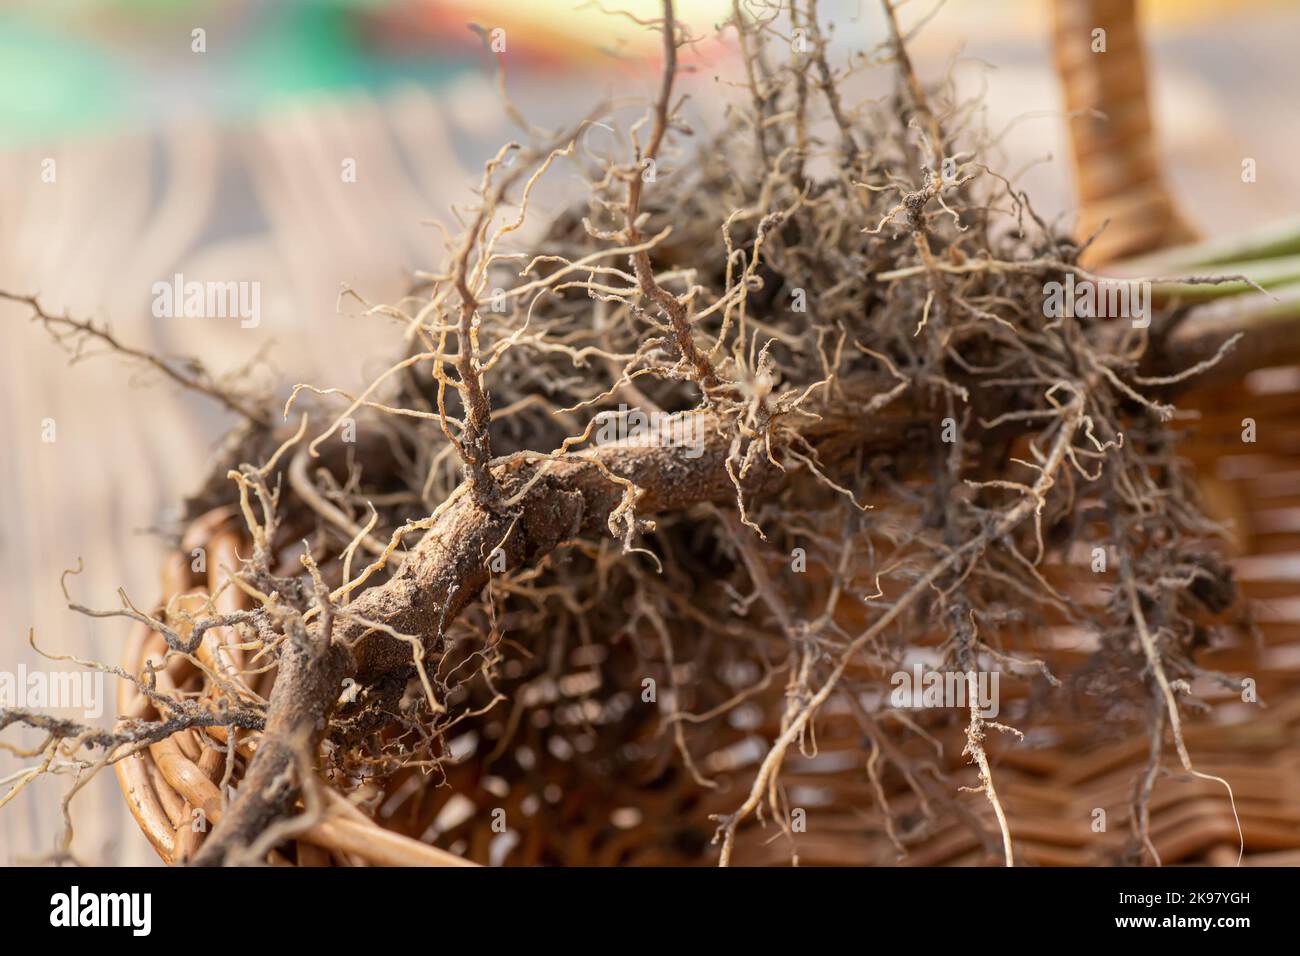 Valerian roots close-up. Collection and harvesting of plant parts for use in traditional and alternative medicine as a sedative and tranquilizer. Ingr Stock Photo